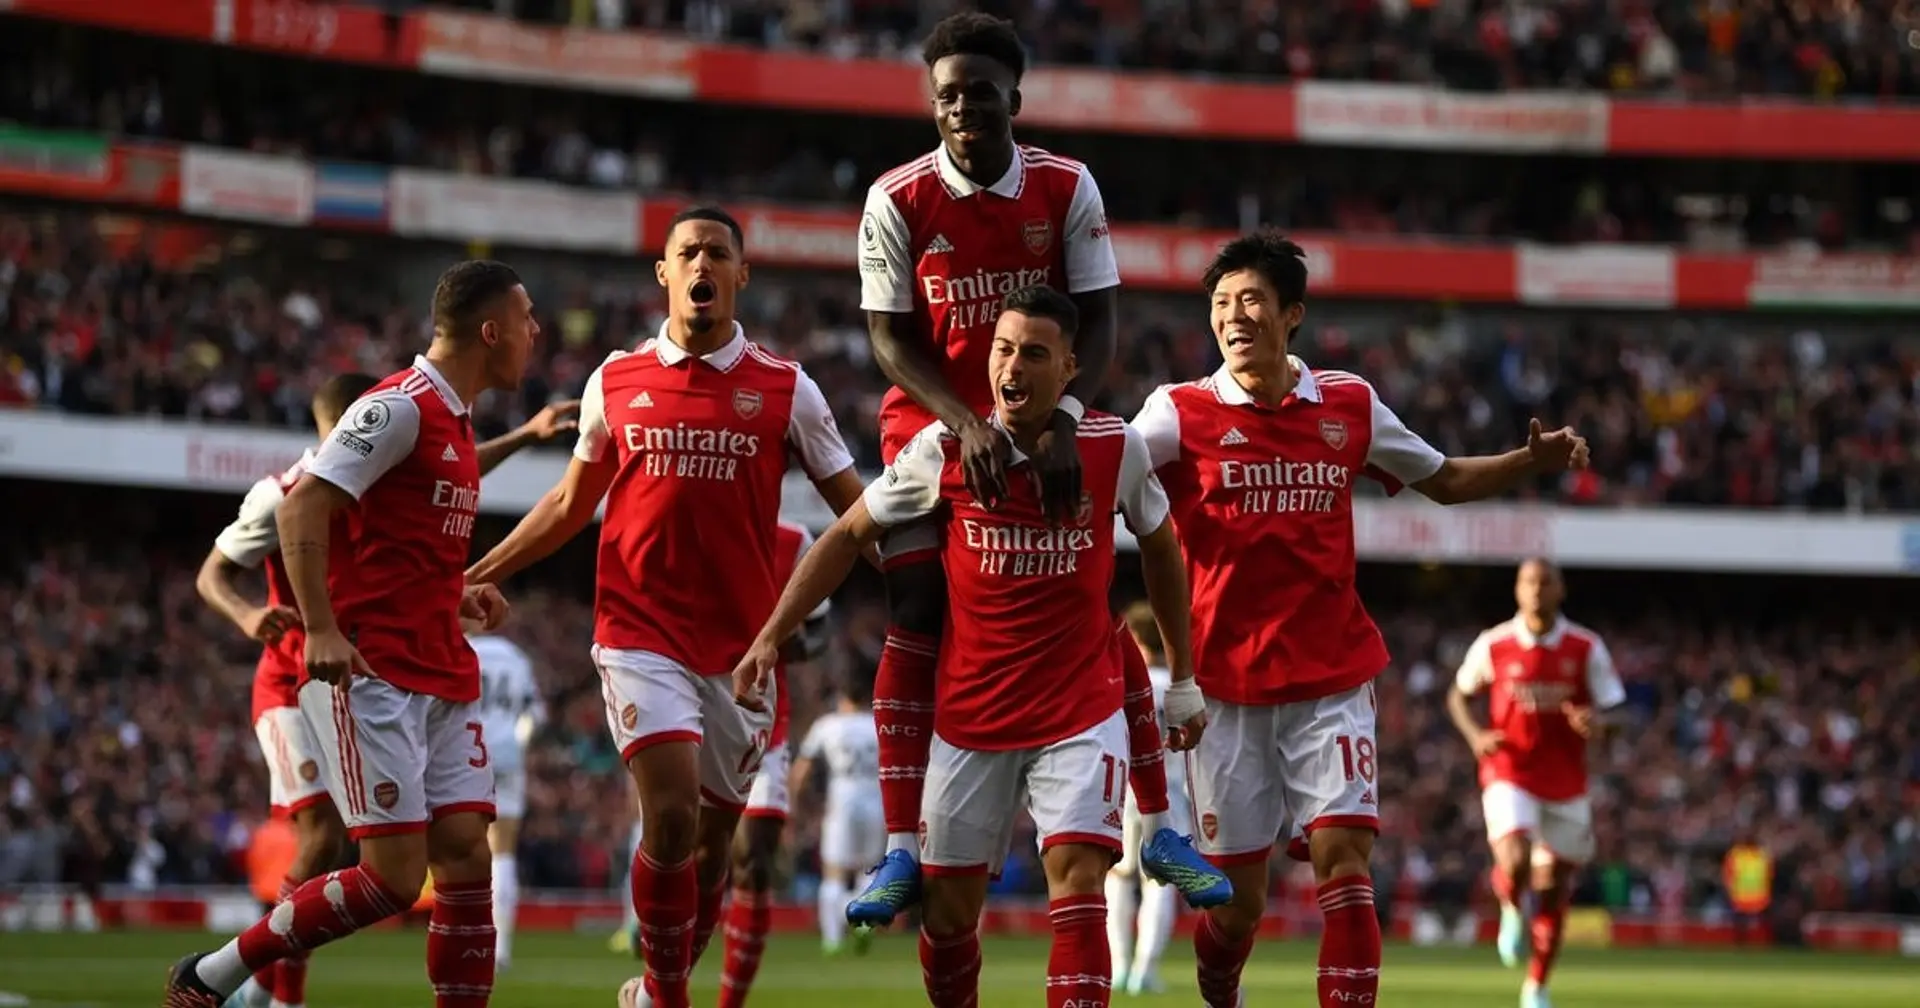 Which players must start for Arsenal vs West Ham and why?